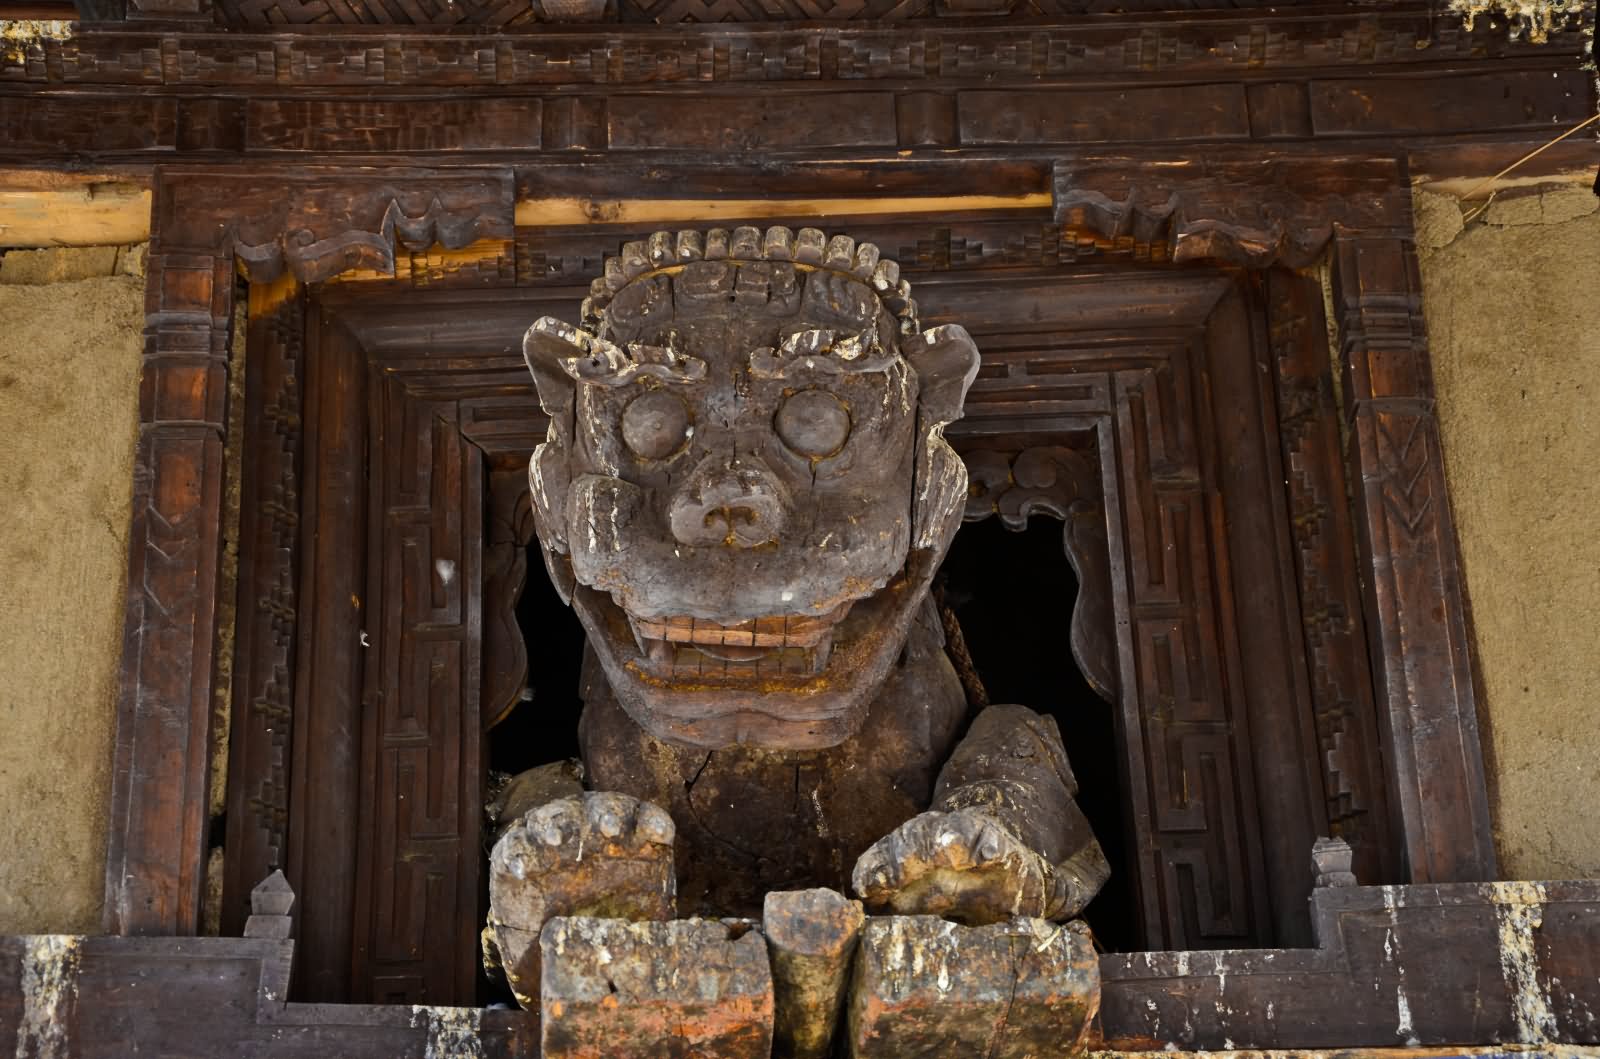 Wooden Sculpture At The Entrance Of The Leh Palace